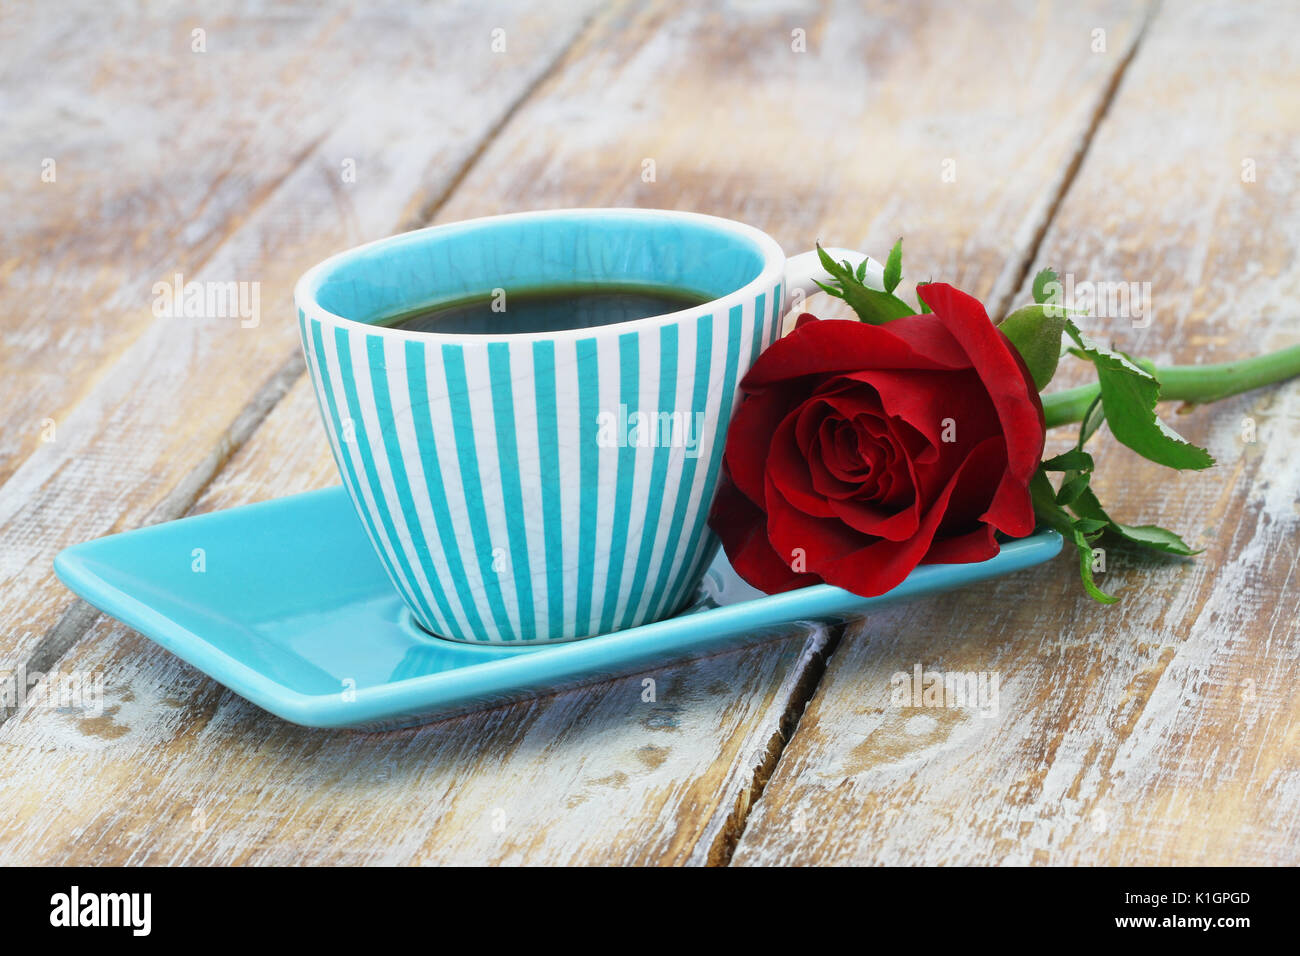 Cup of coffee with one red rose on a side with copy space Stock Photo